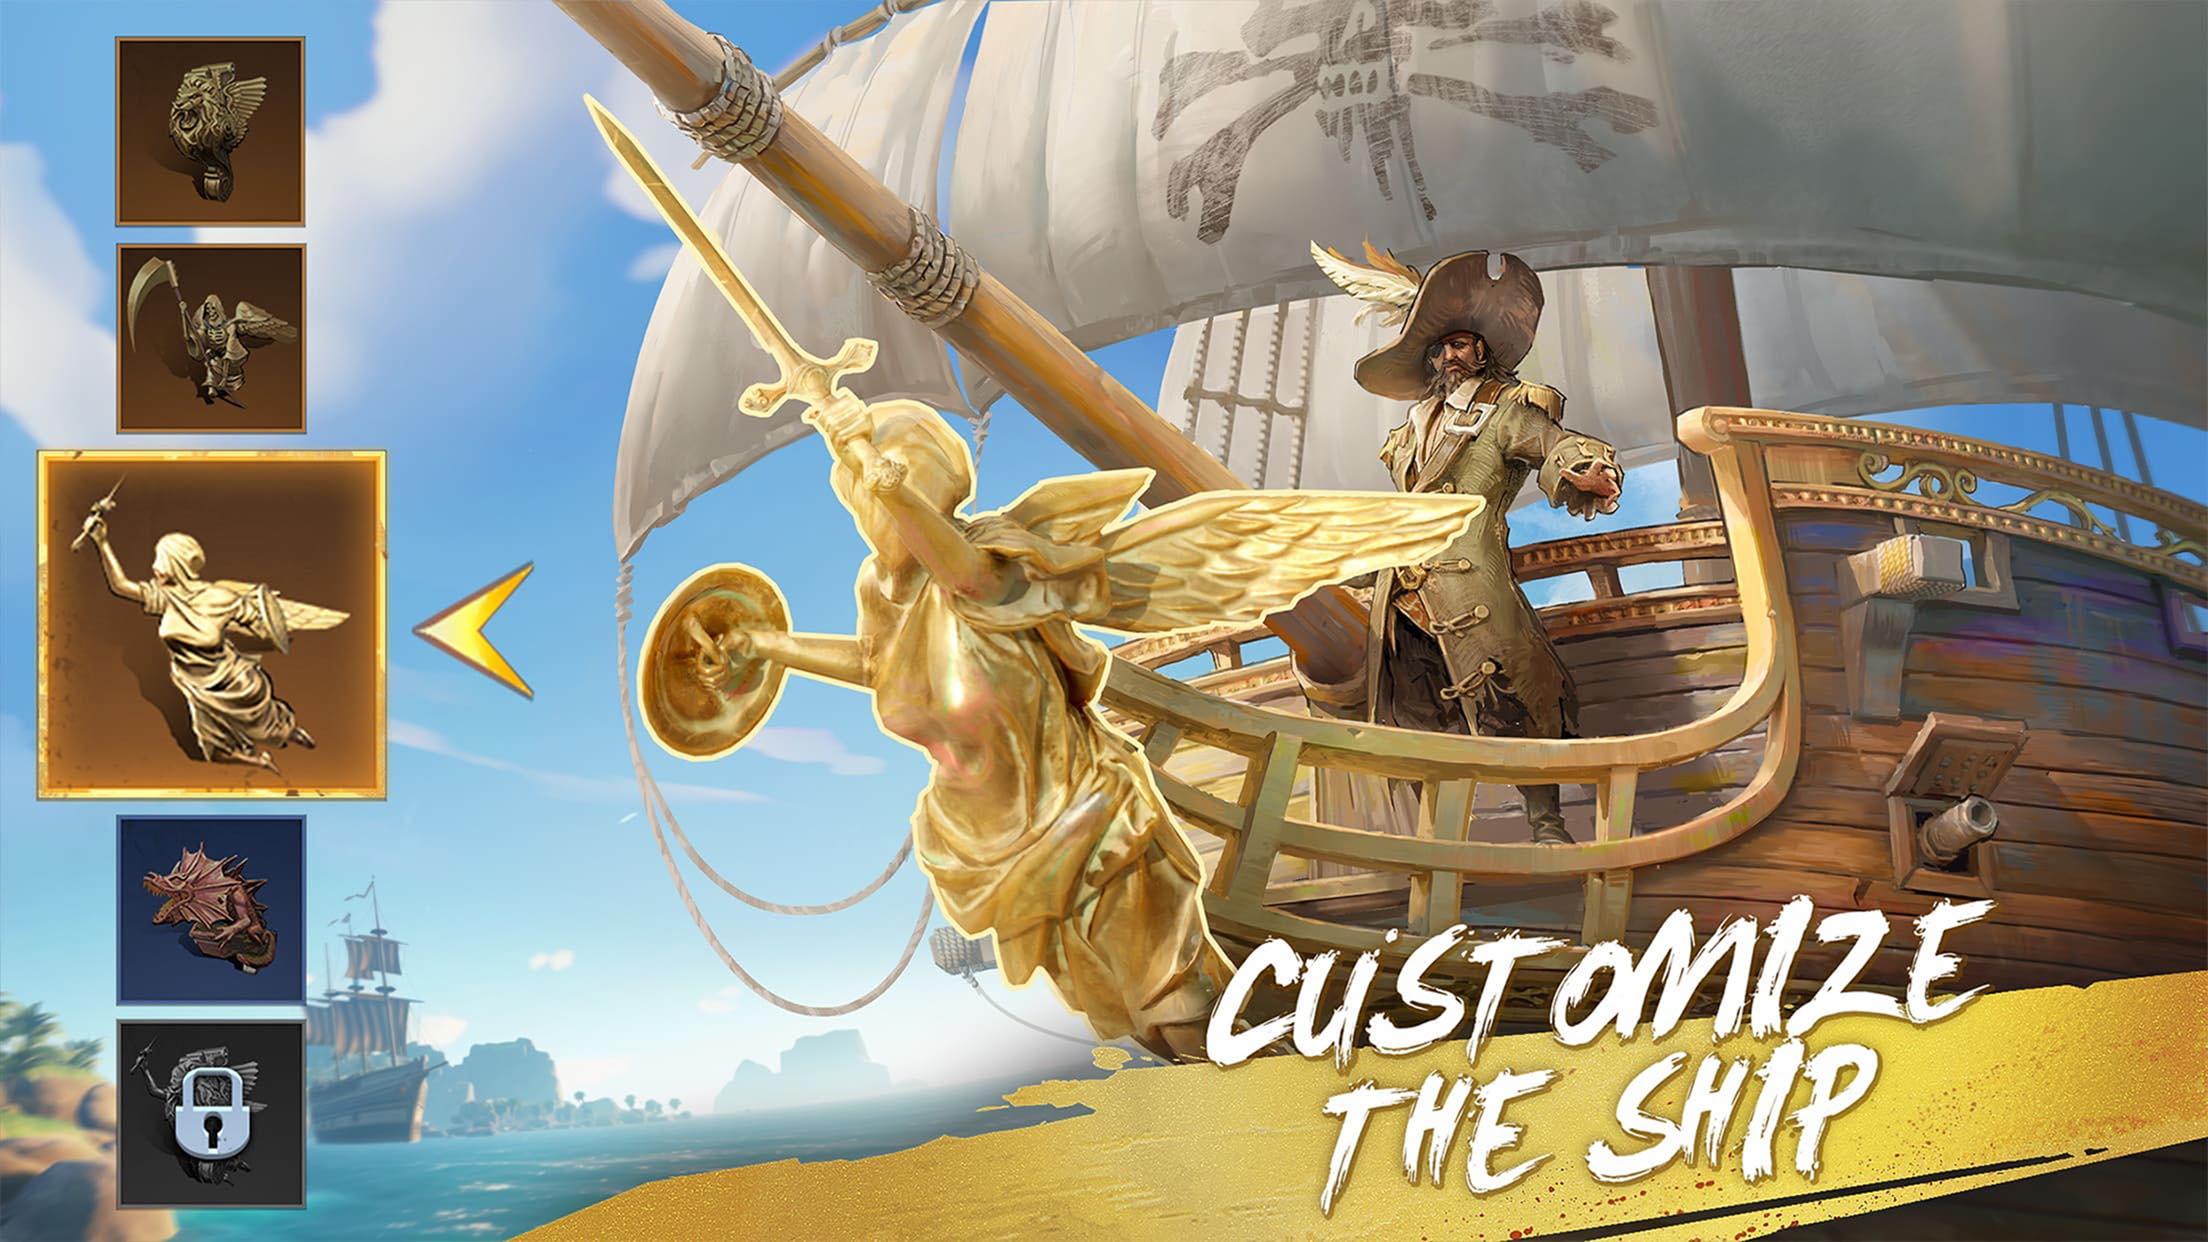 Final Sea Pirate Power Gift Codes (Android/IOS) 